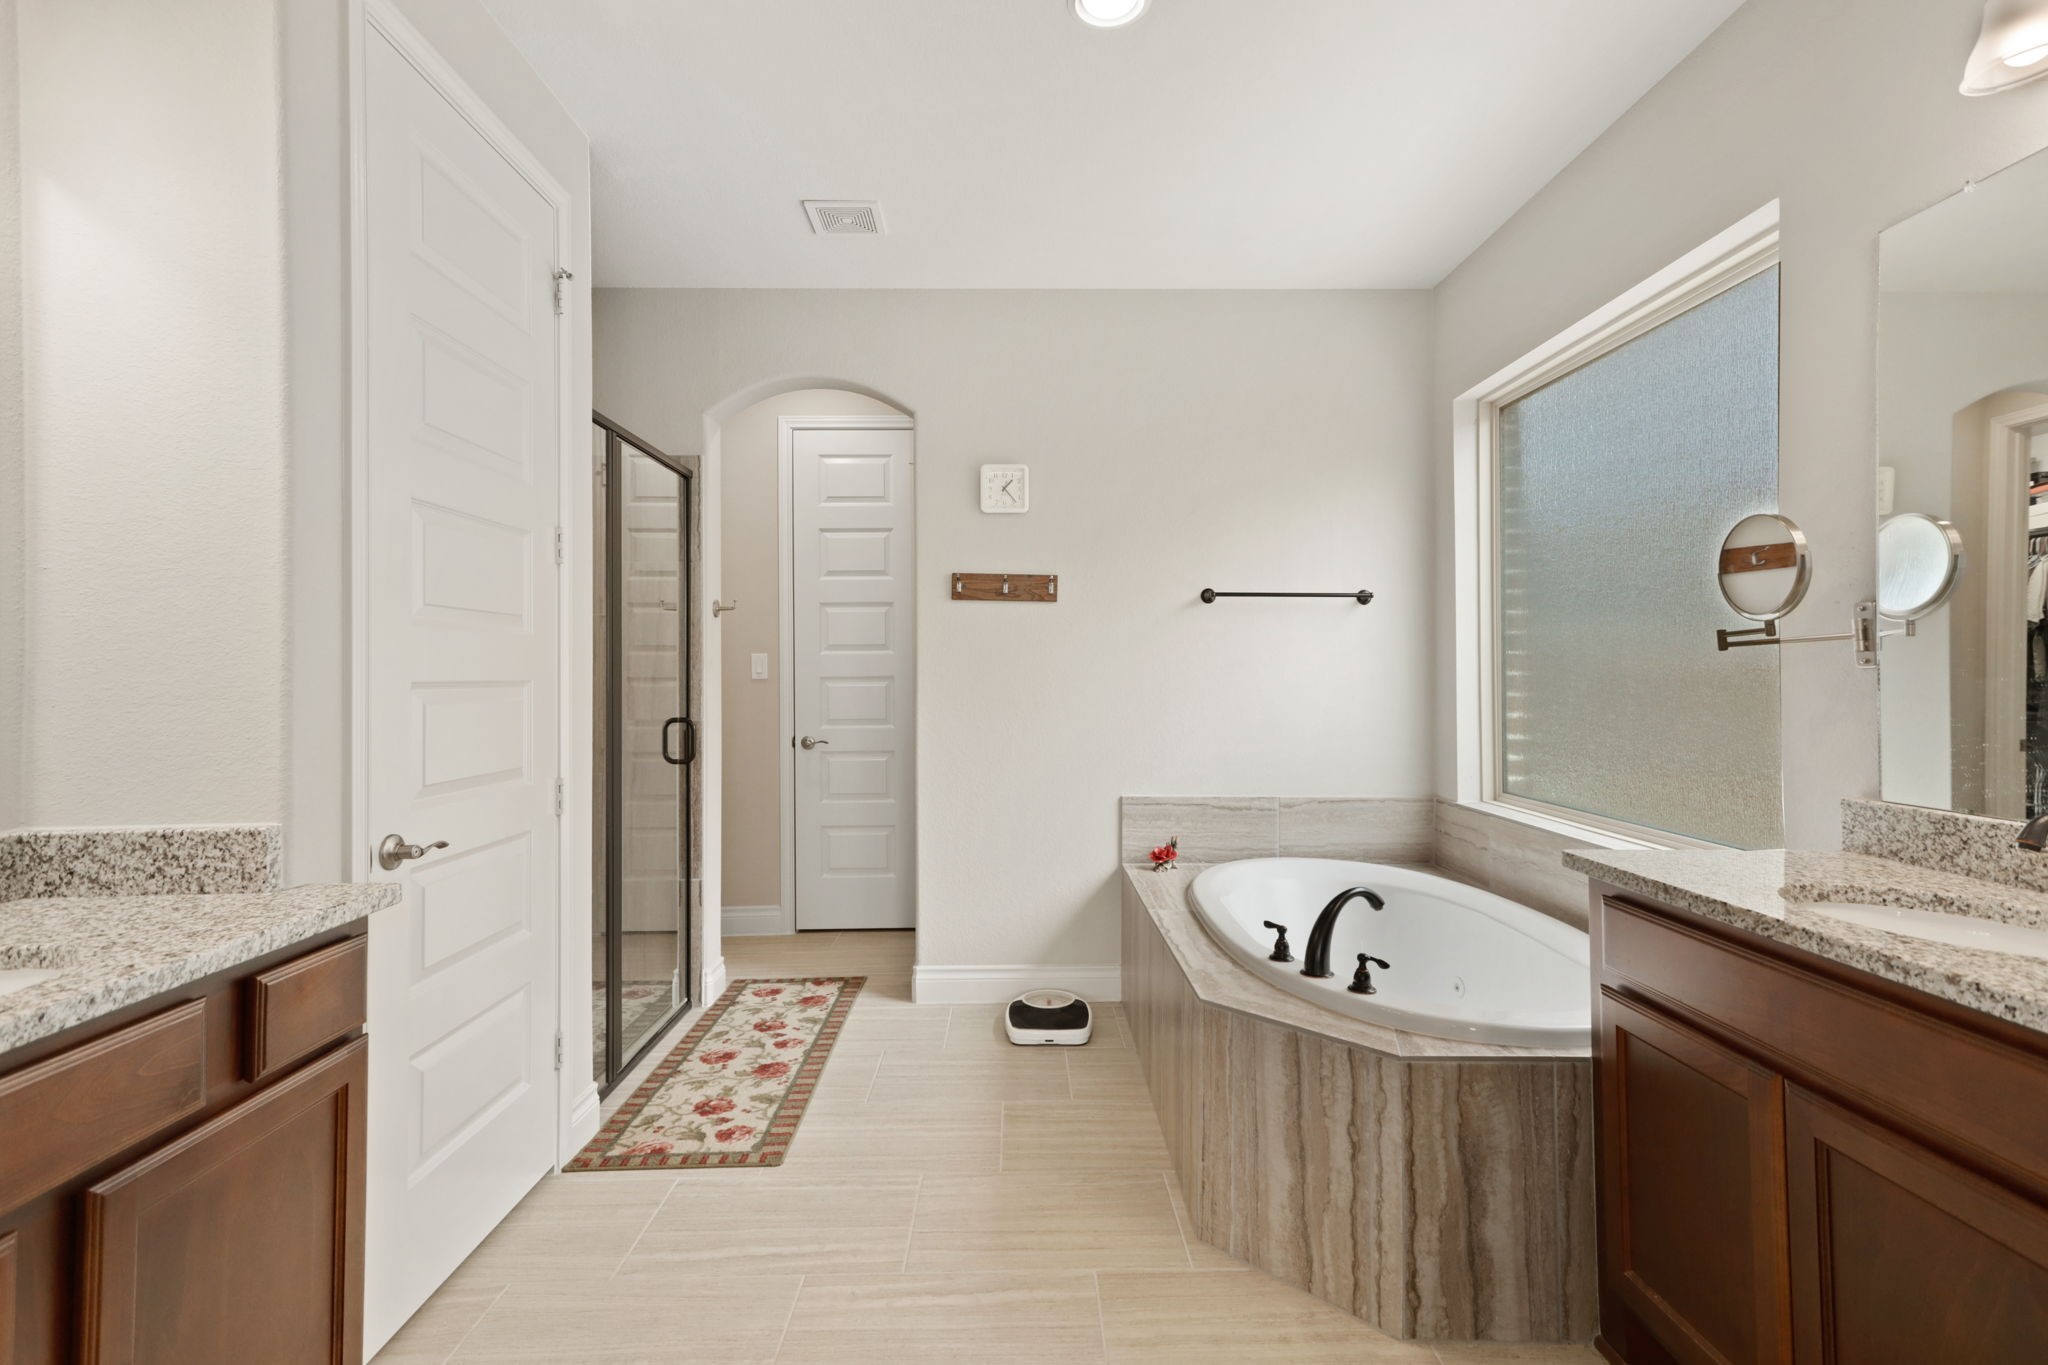 Primary bath with tub and standing shower.